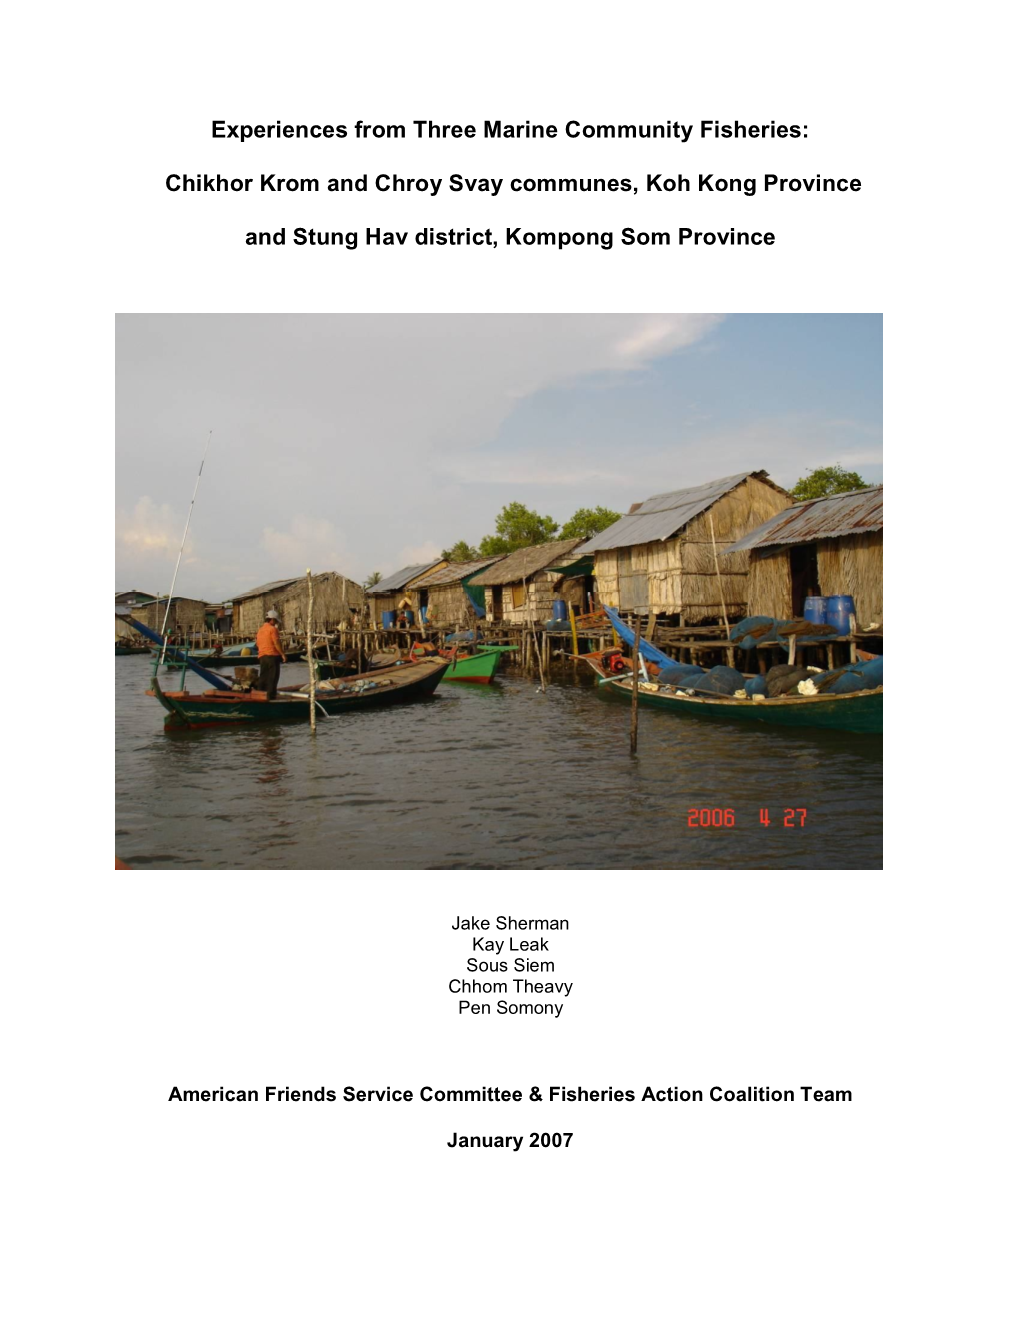 Chikhor Krom and Chroy Svay Communes, Koh Kong Province And